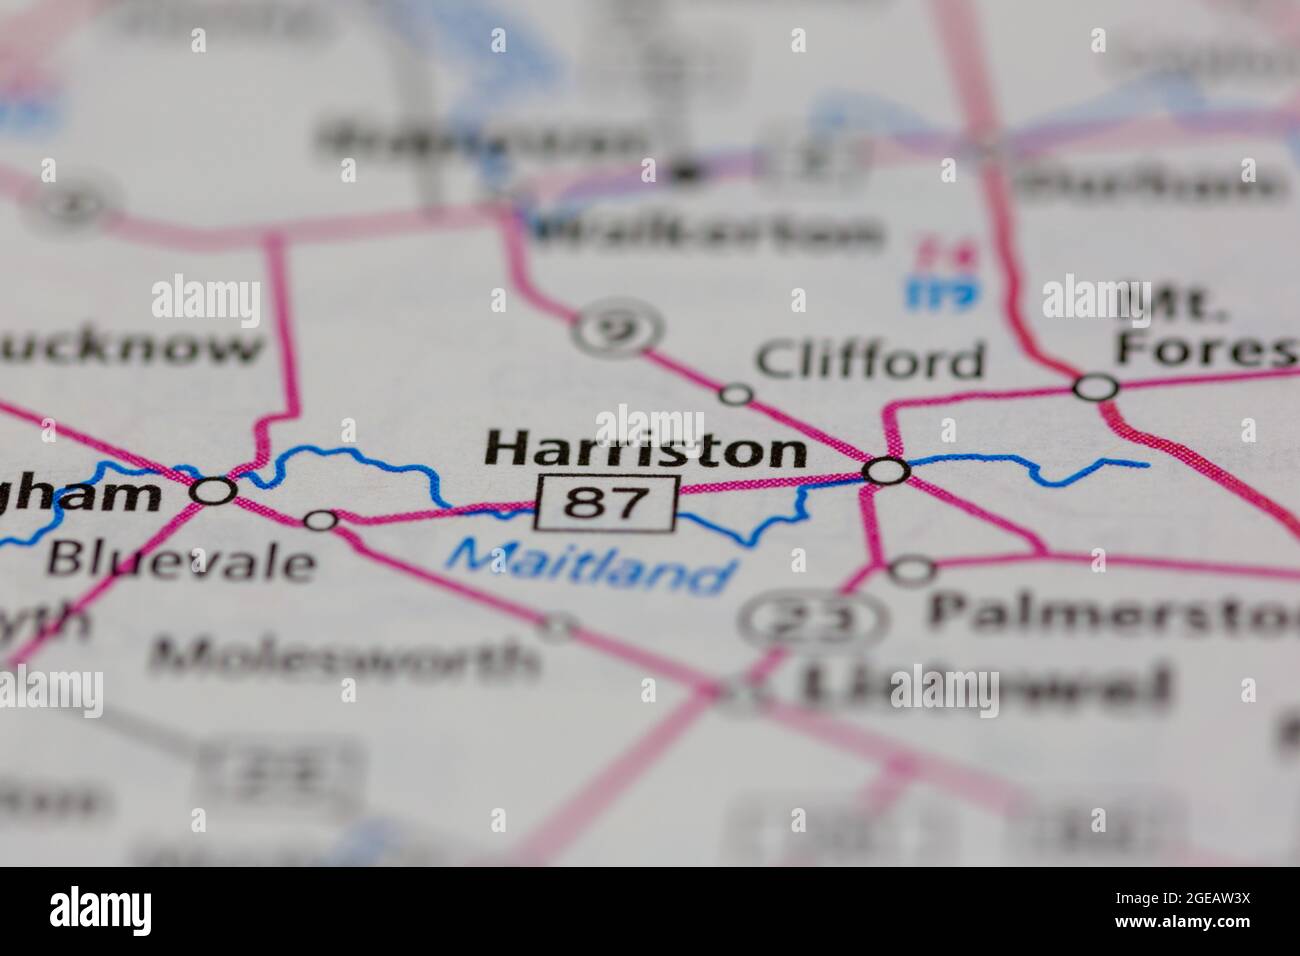 Harriston Ontario Canada Shown On A Road Map Or Geography Map 2GEAW3X 